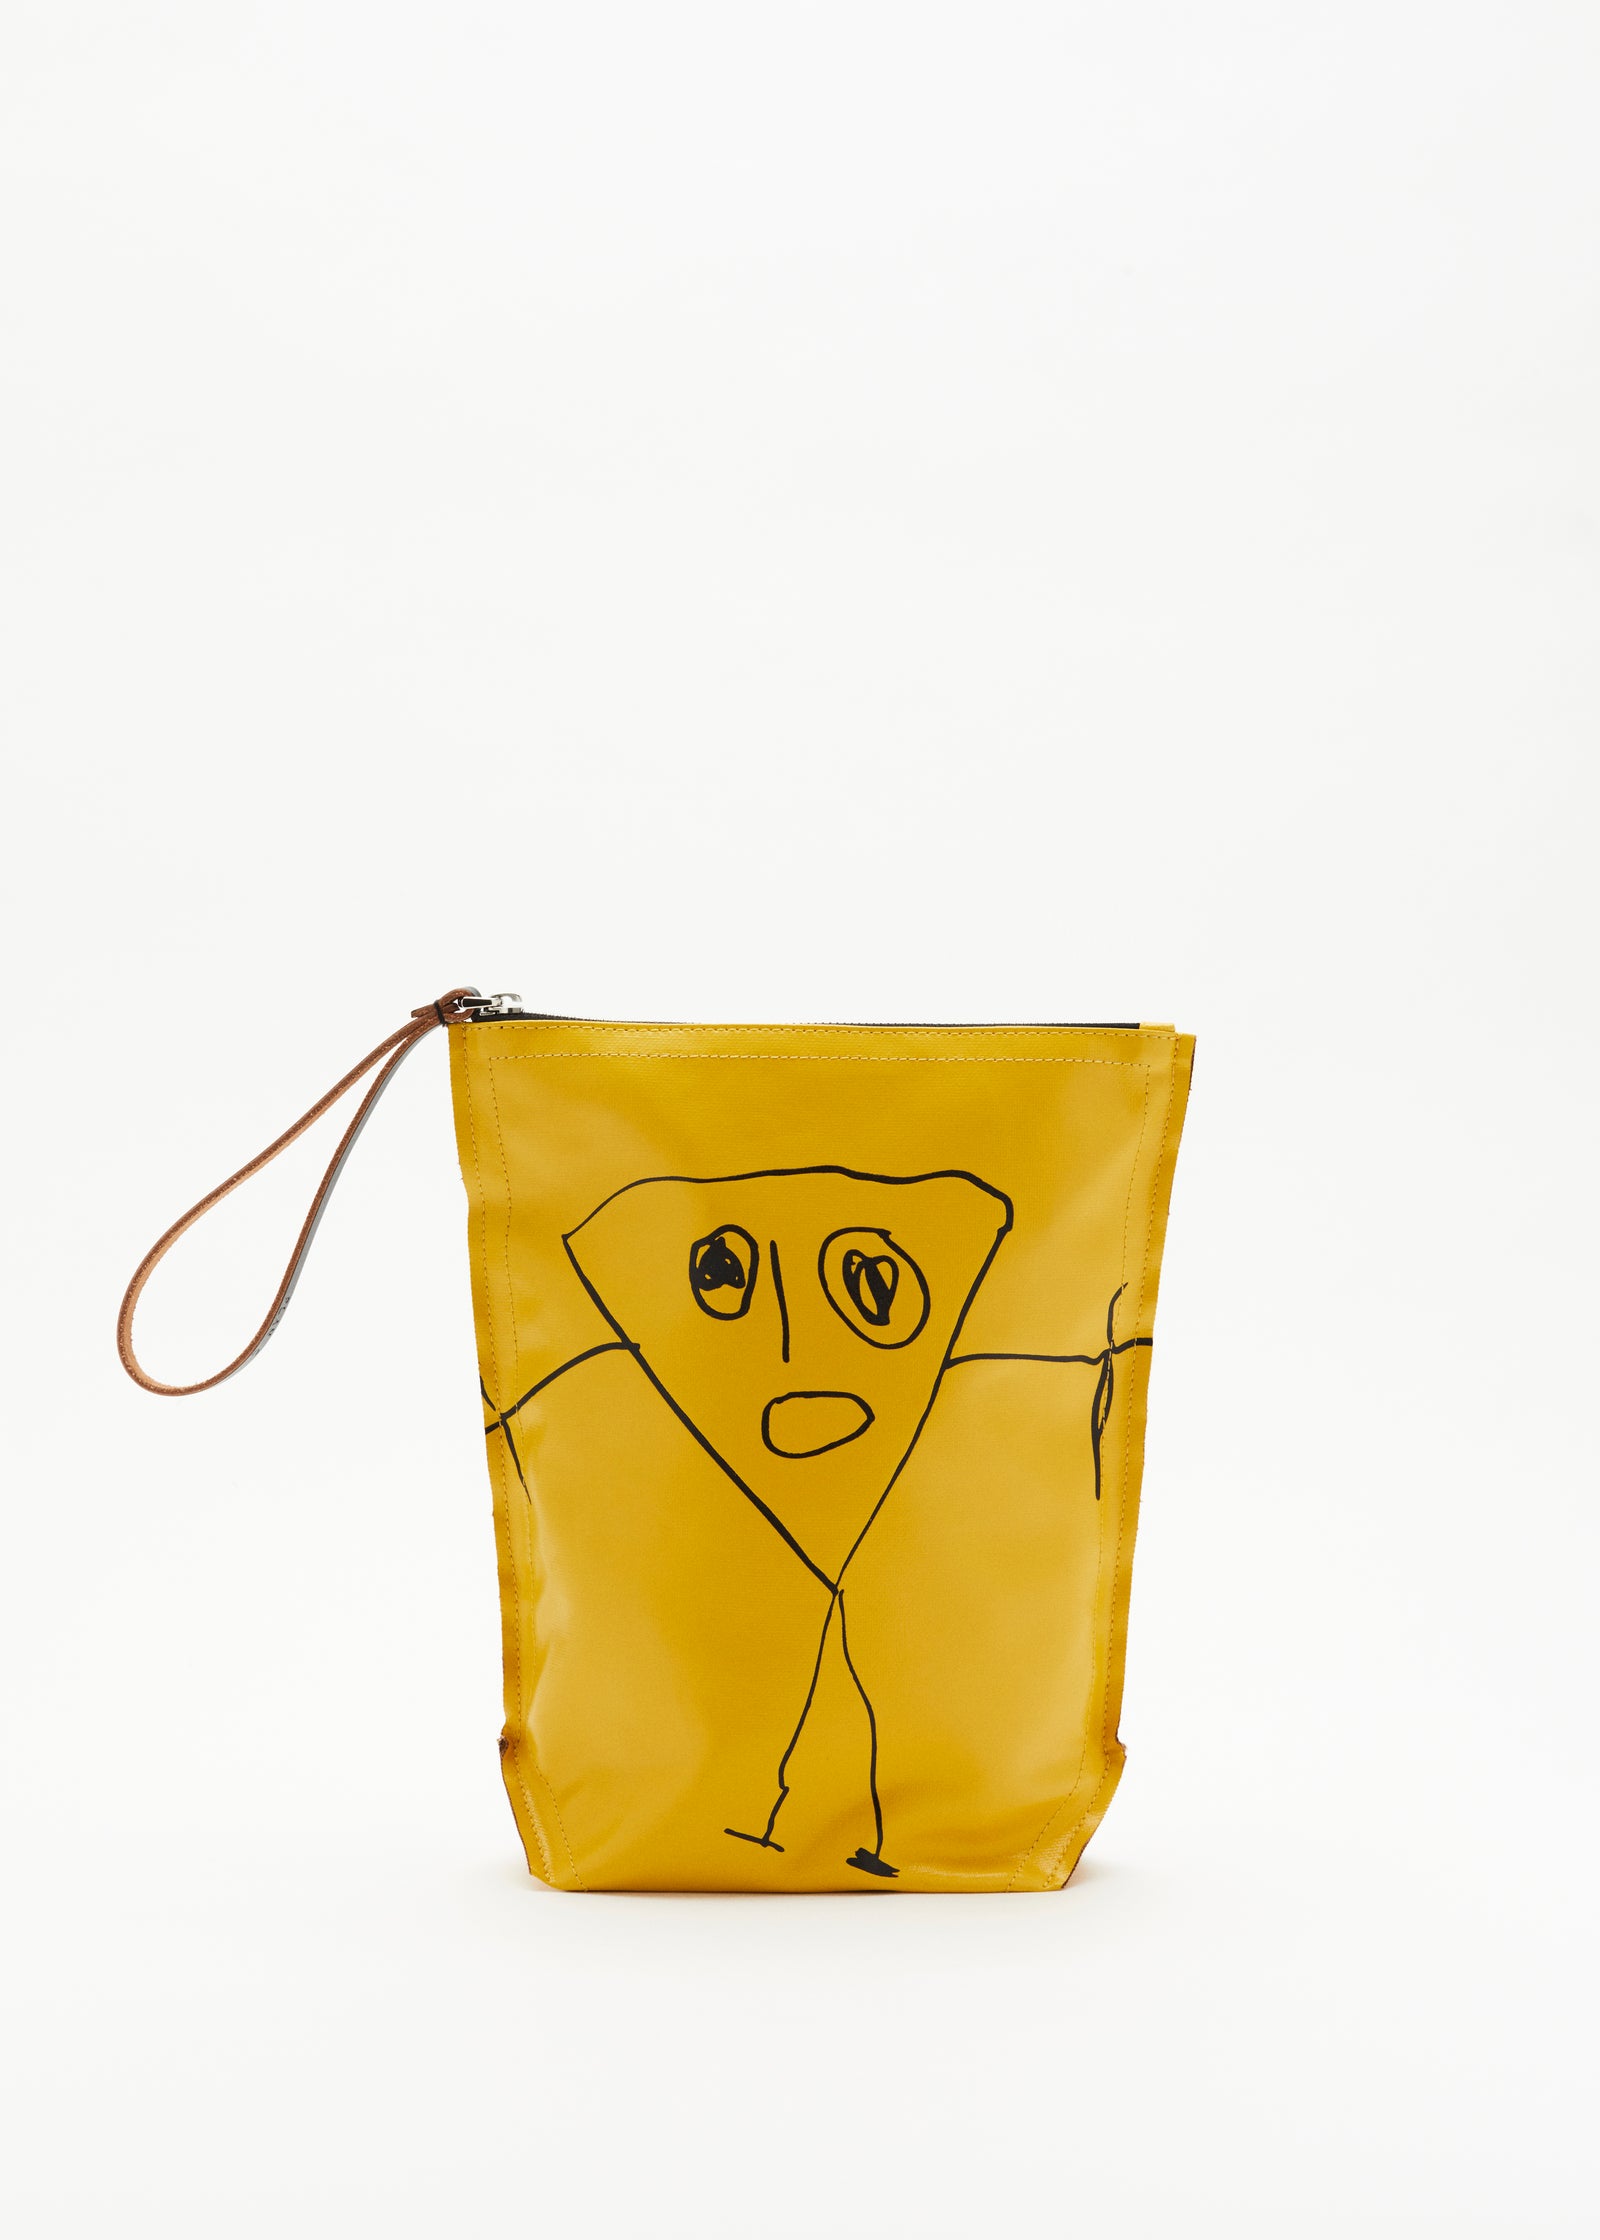 "PILI AND BIANCA" YELLOW POUCH